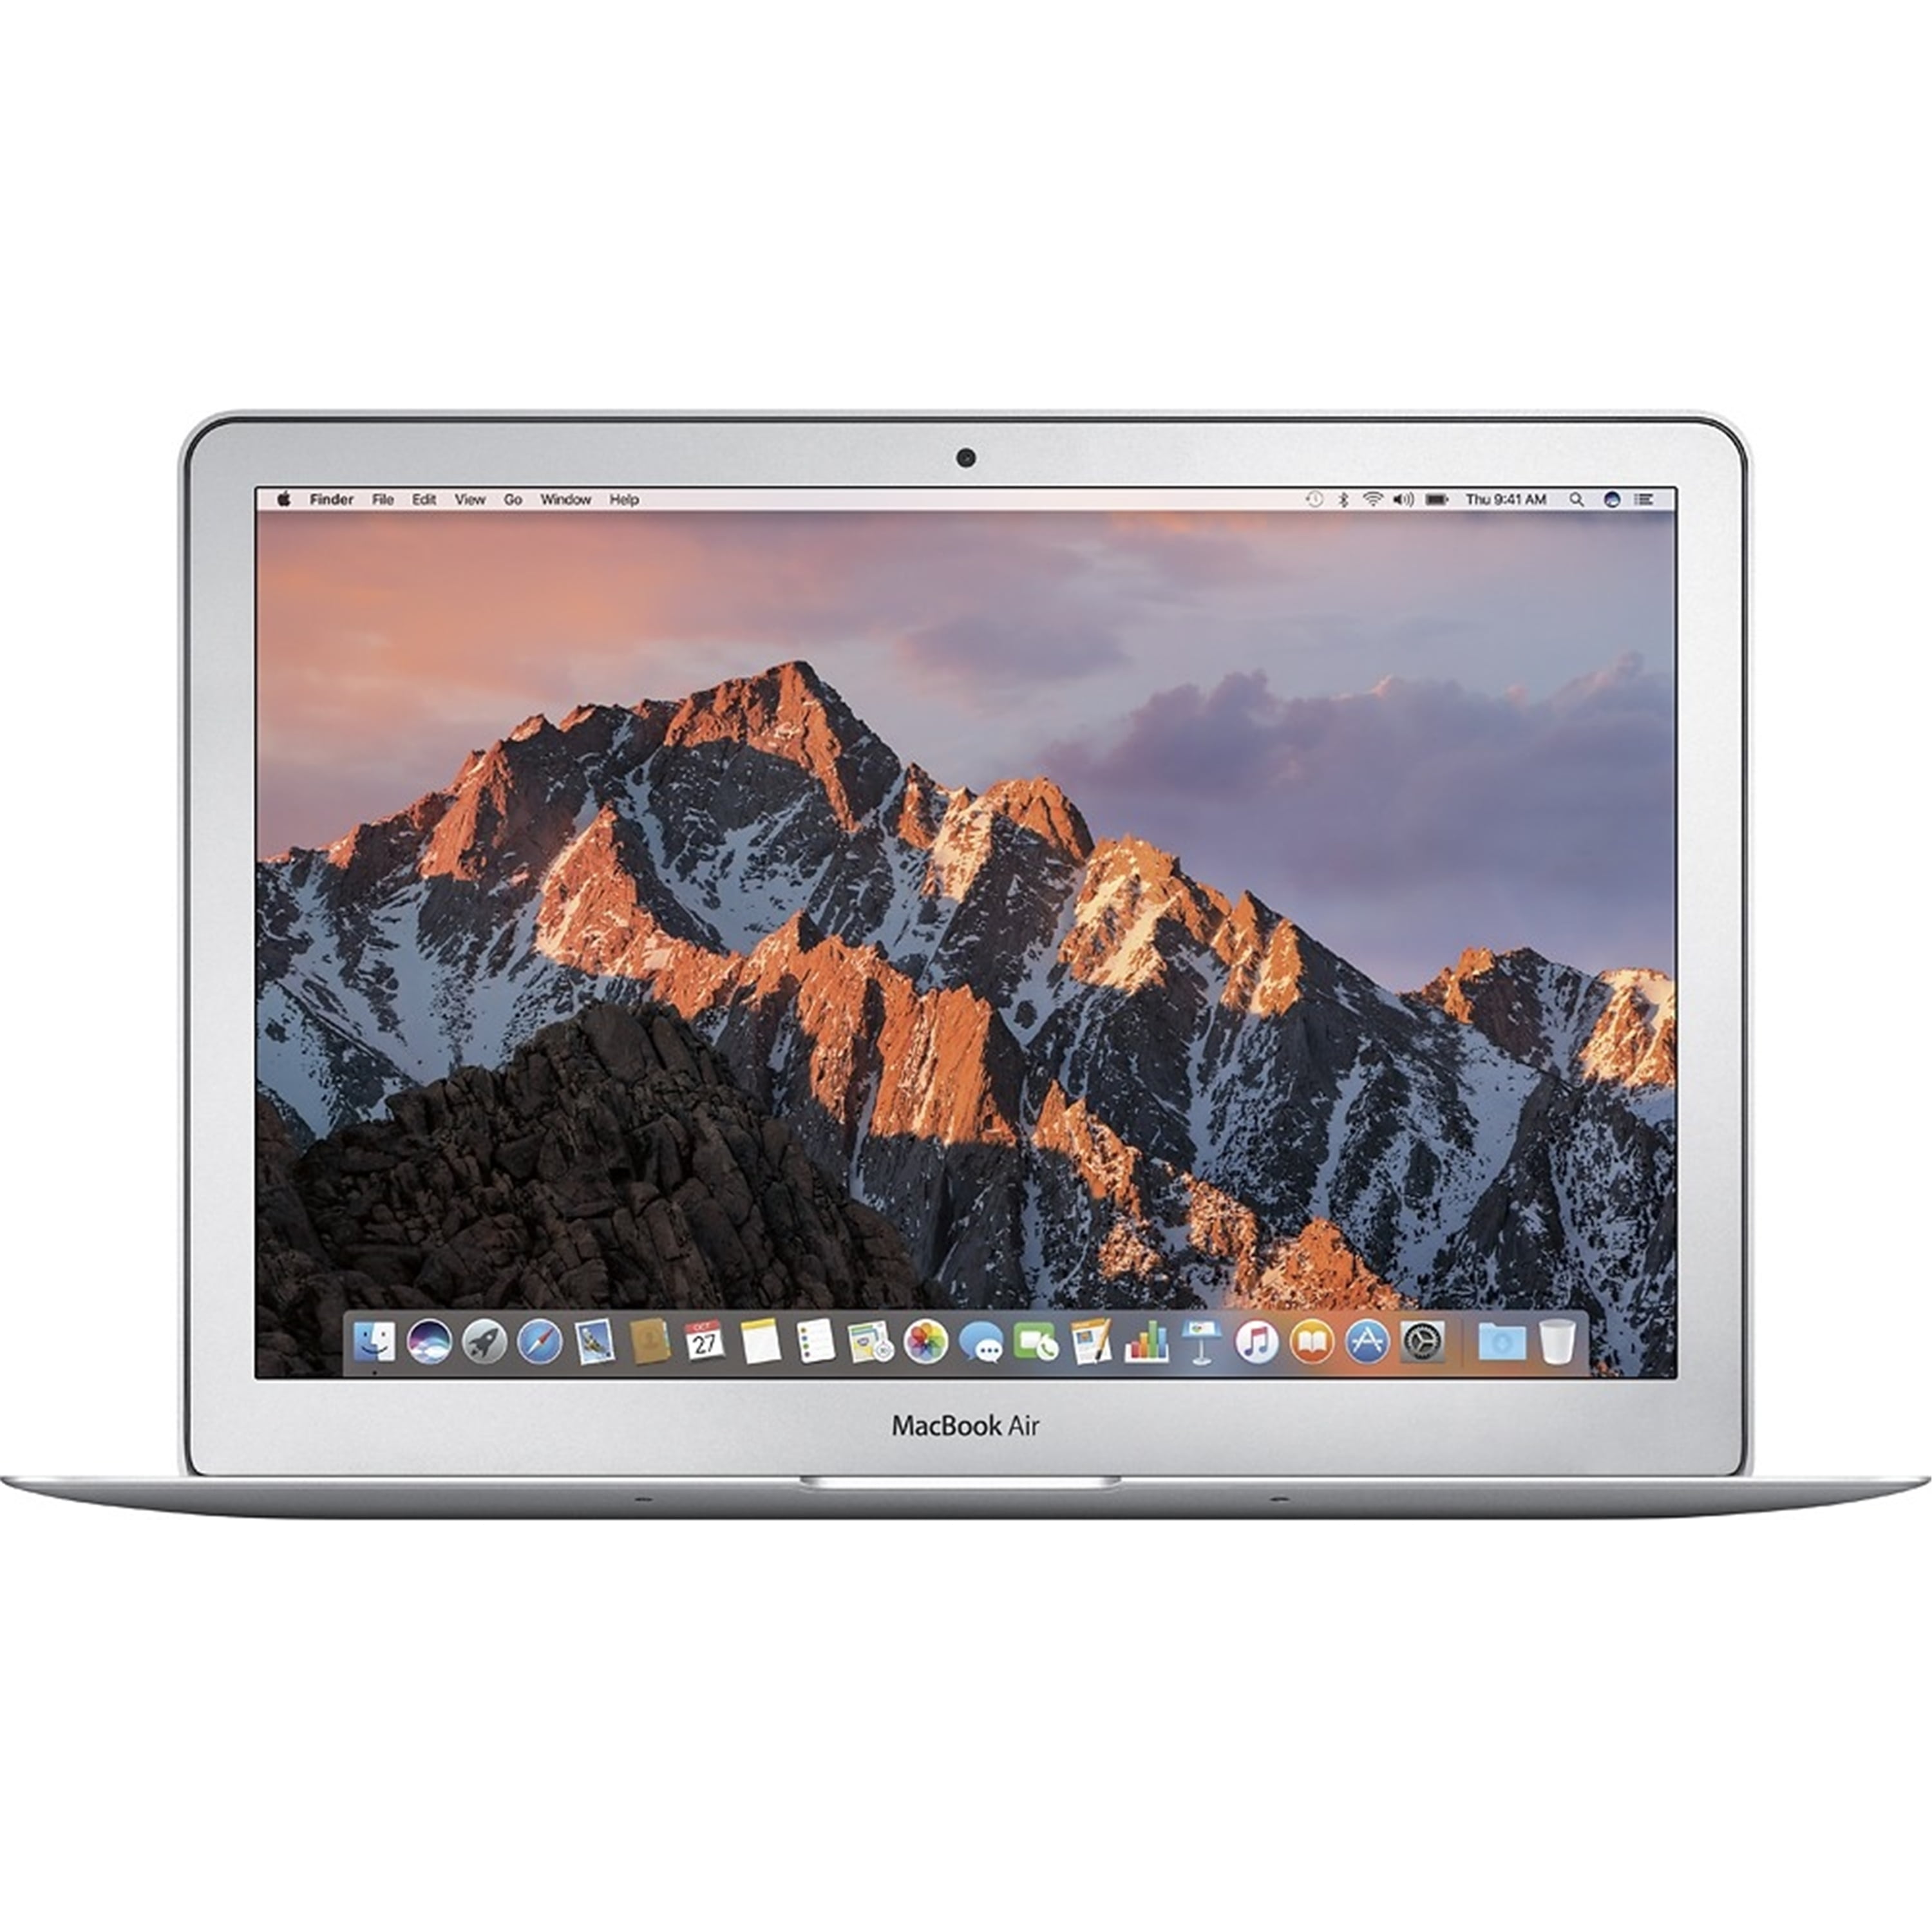 MacBook Air 13 i5 8GB 128GB early 2015 - タブレット